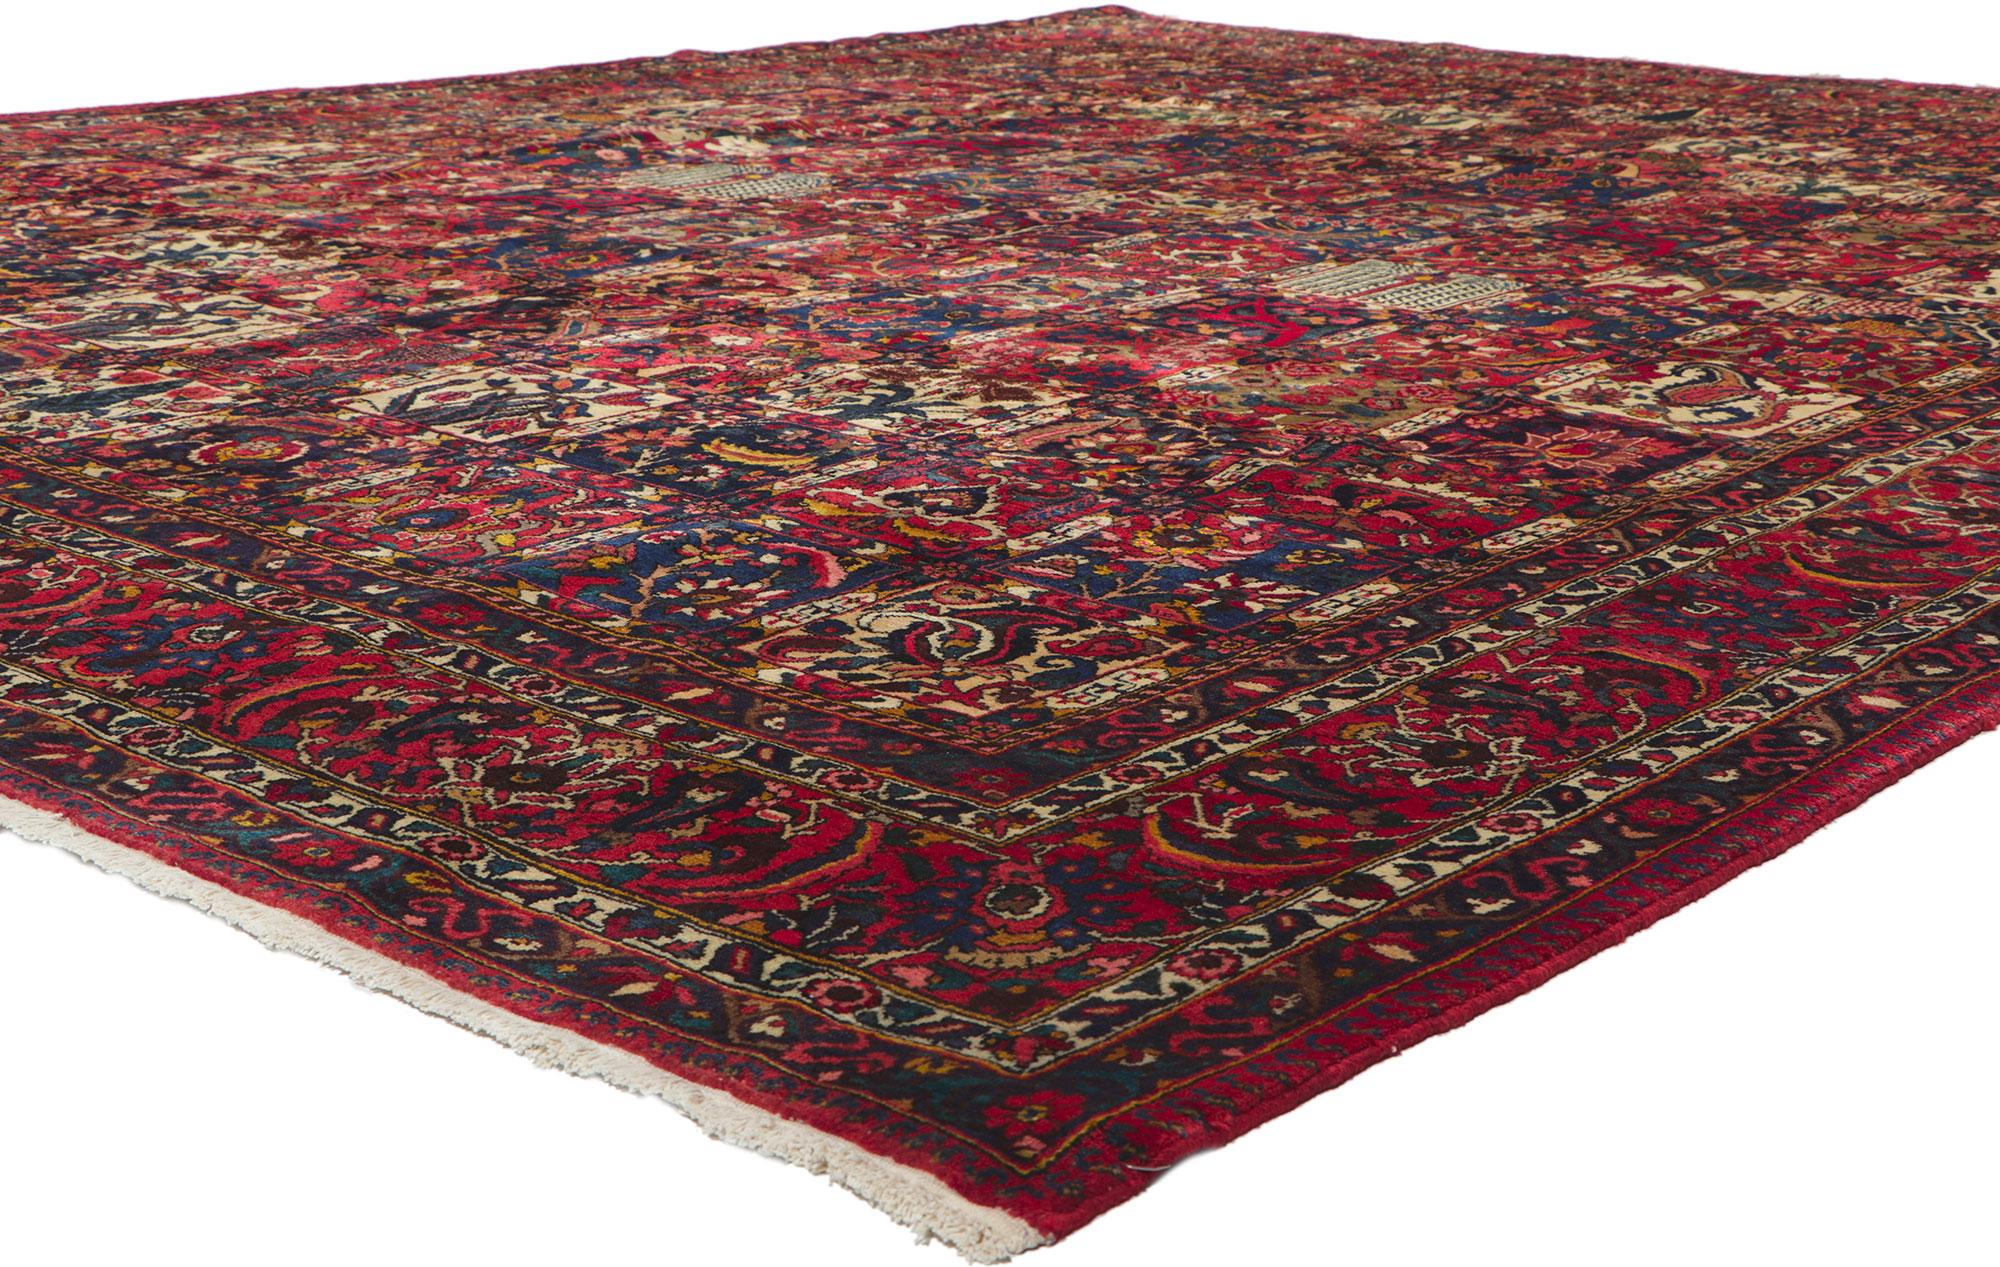 61096 vintage Persian Bakhtiari rug, 10'02 x 13'03.
With its classic four seasons panel design, incredible detail and texture, this hand-knotted wool vintage Persian Bakhtiari rug is poised to impress. The eye-catching botanical pattern and